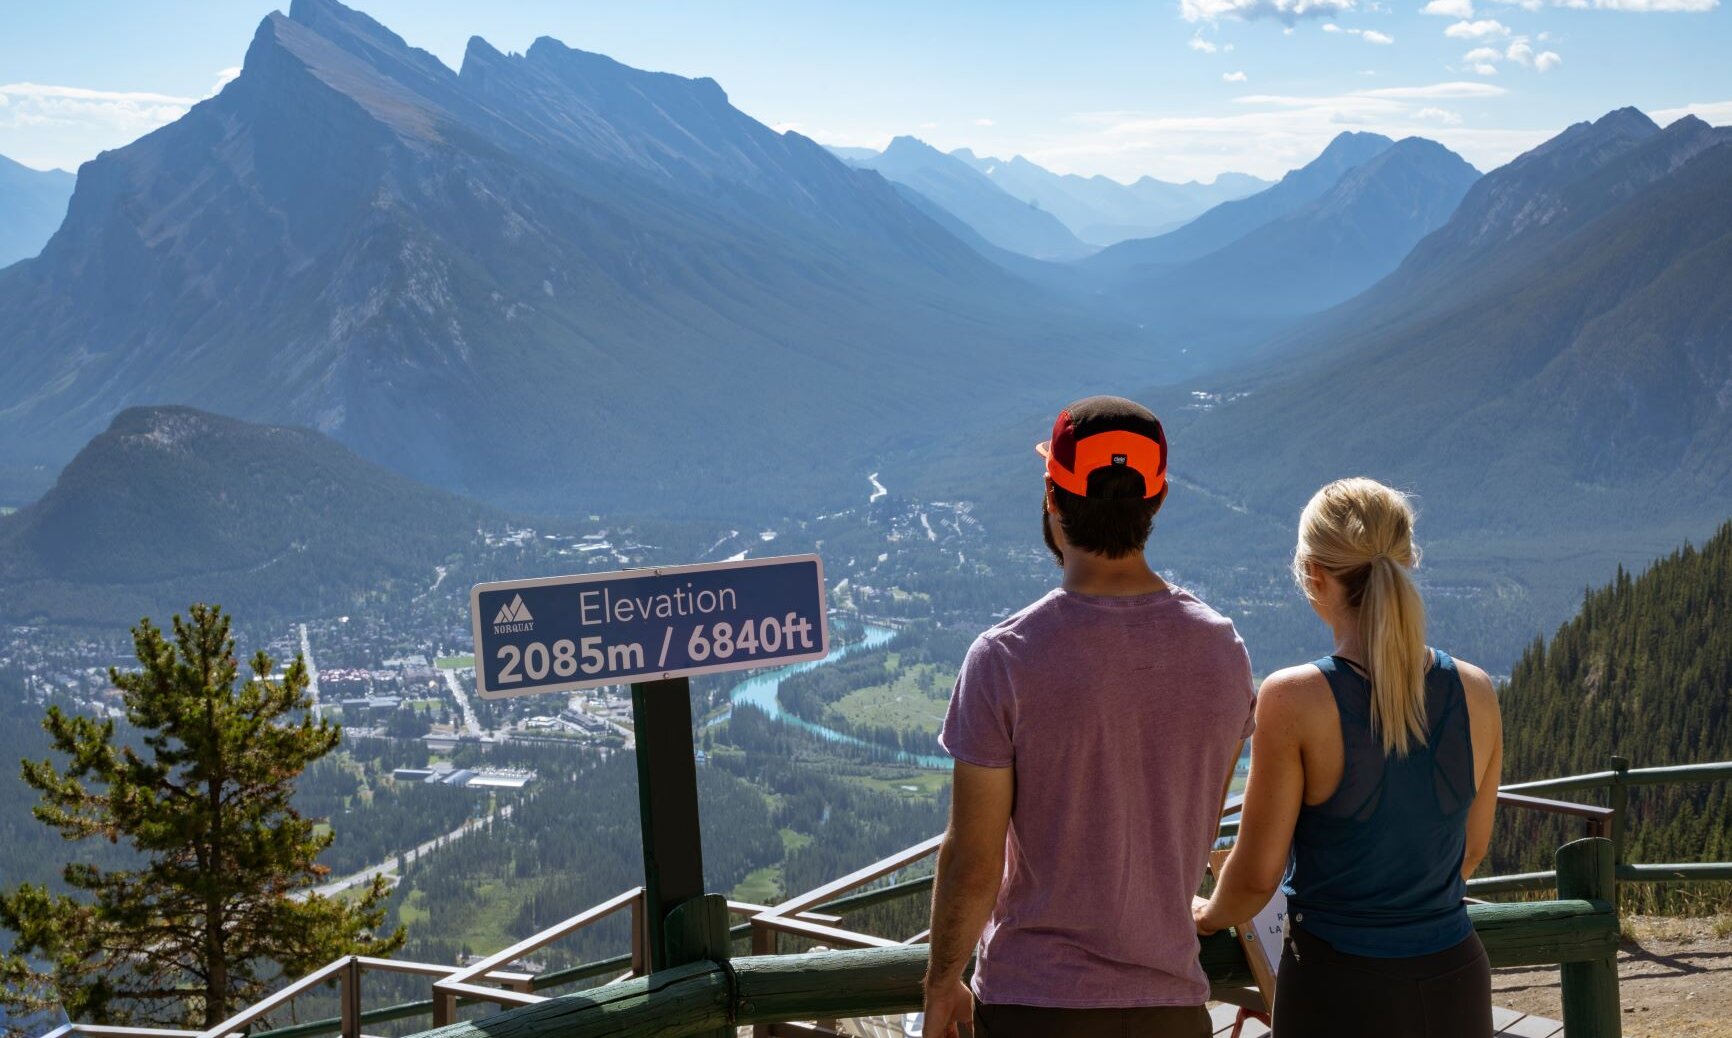 A couple admiring the view from the top of the Mount Norquay Chairlift